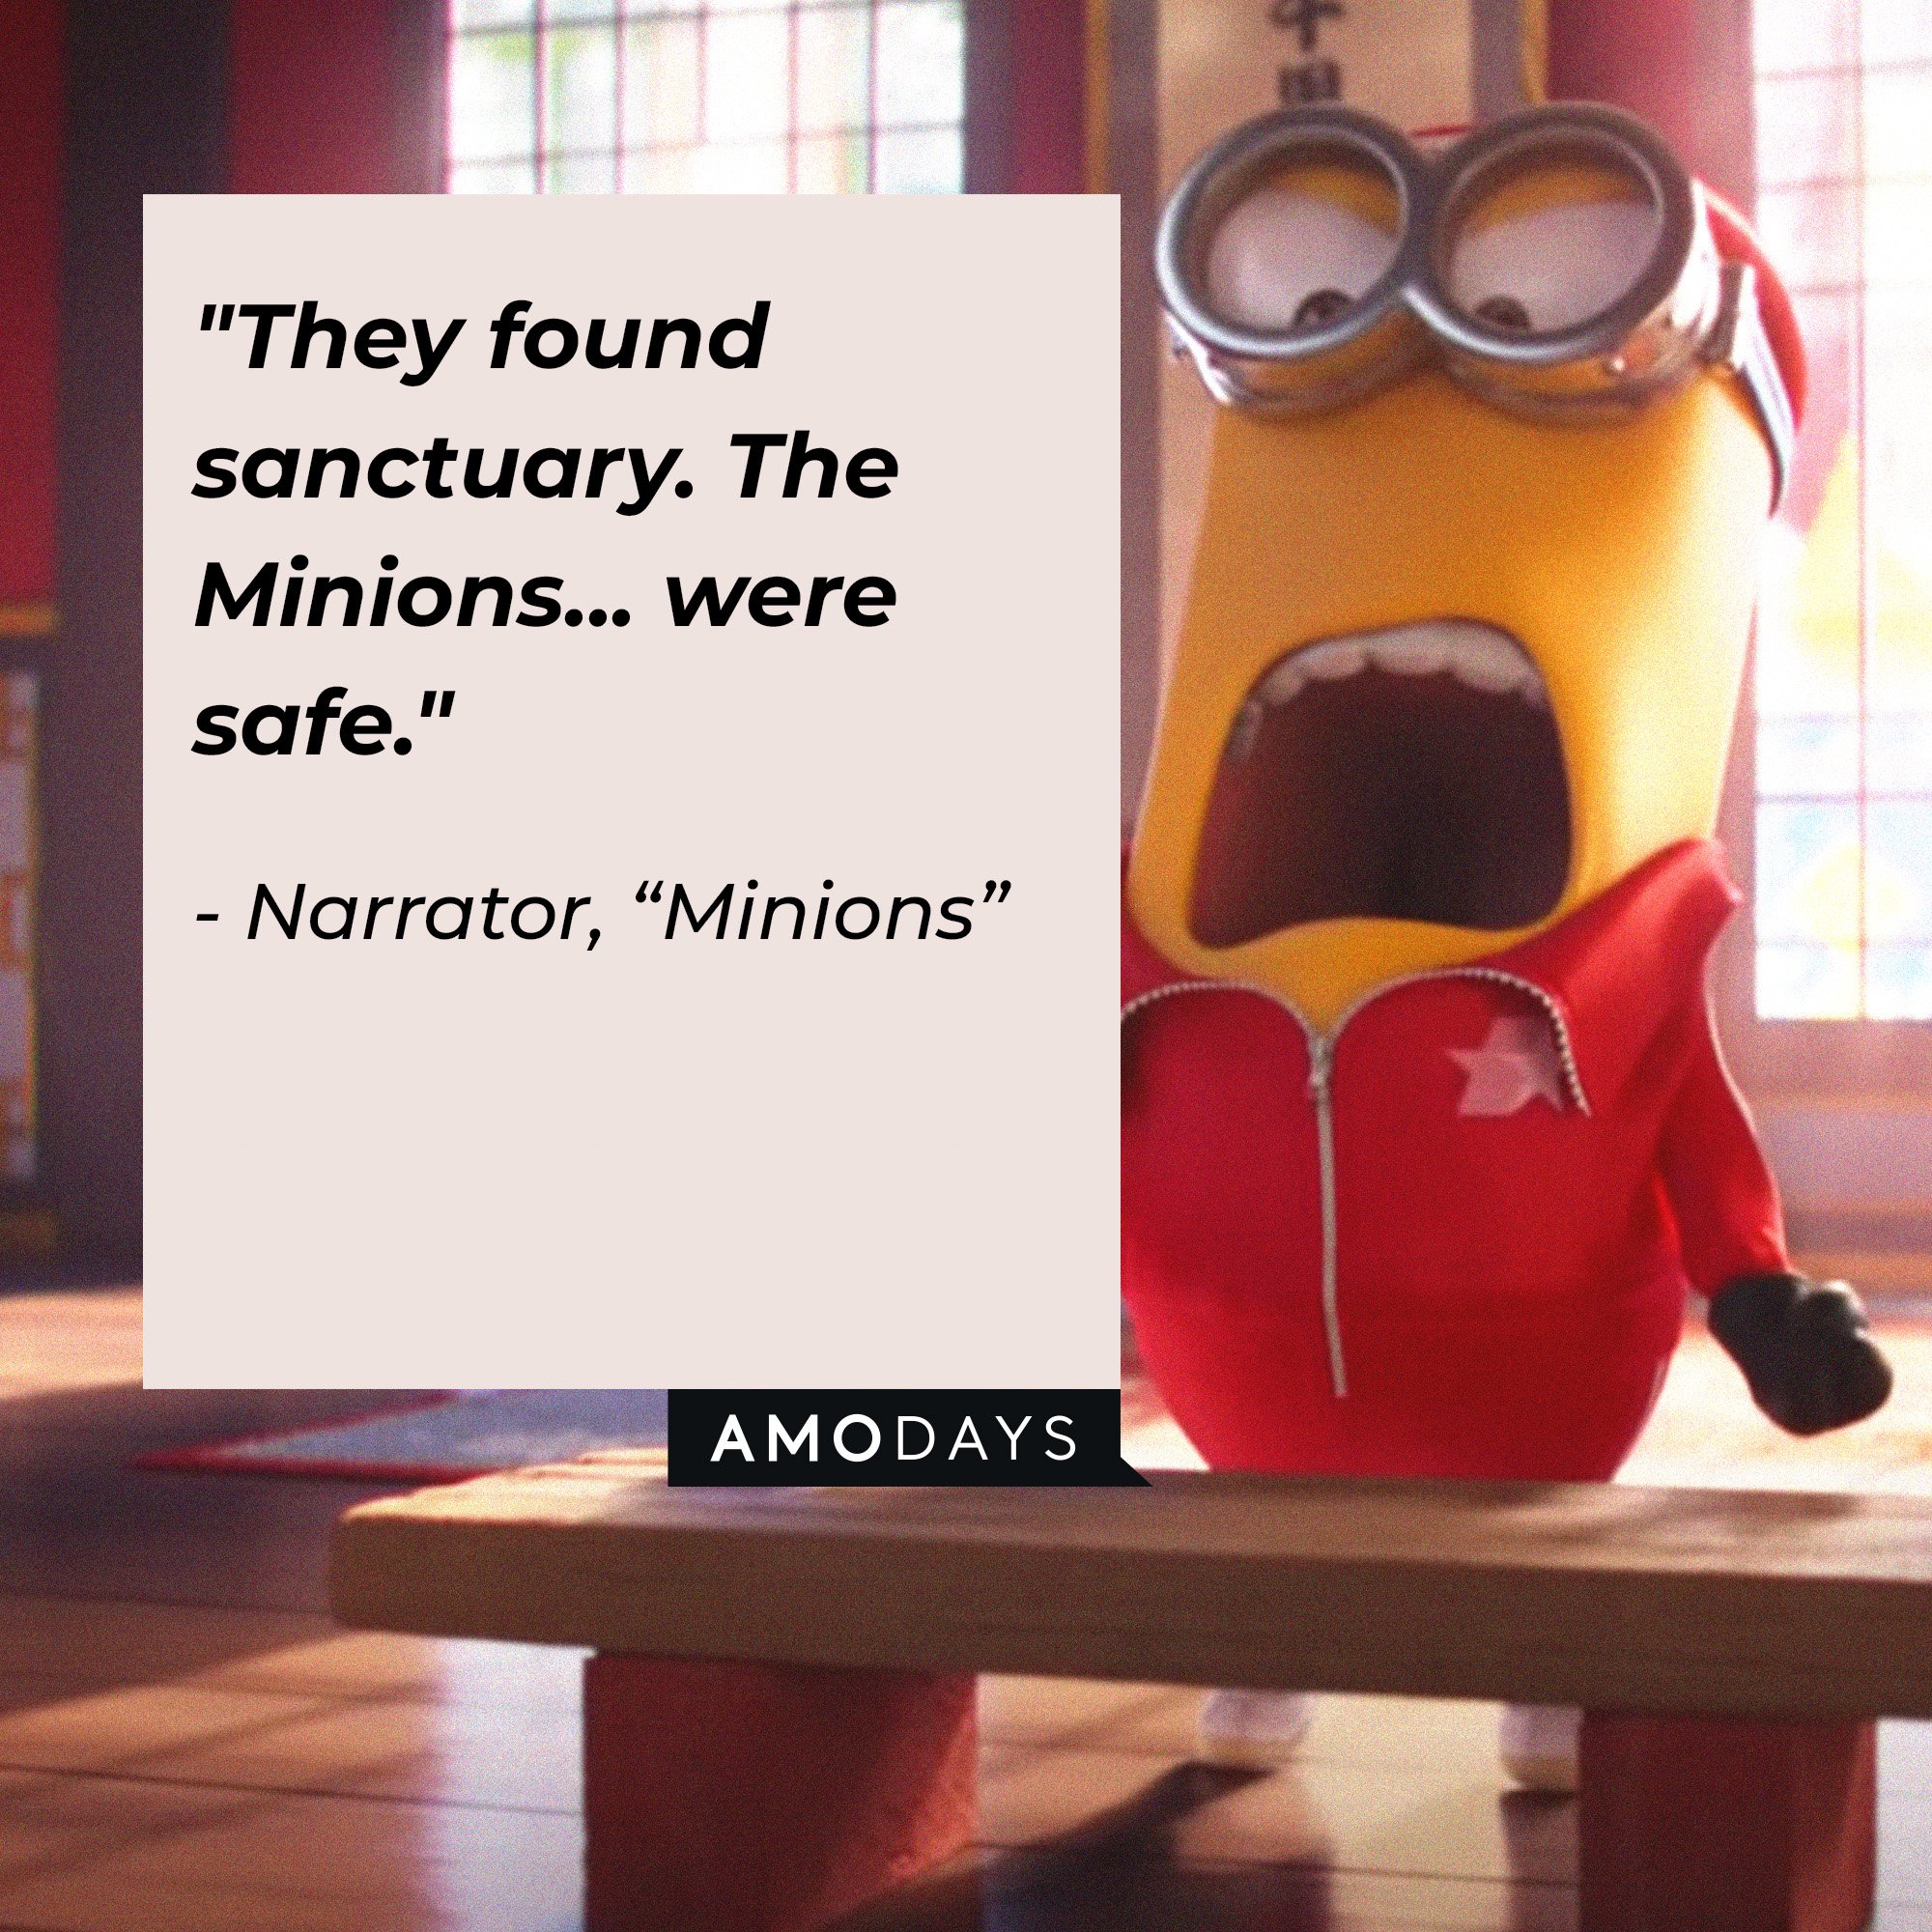 Narrator's quote: "They found sanctuary. The Minions... were safe." | Image: AmoDays